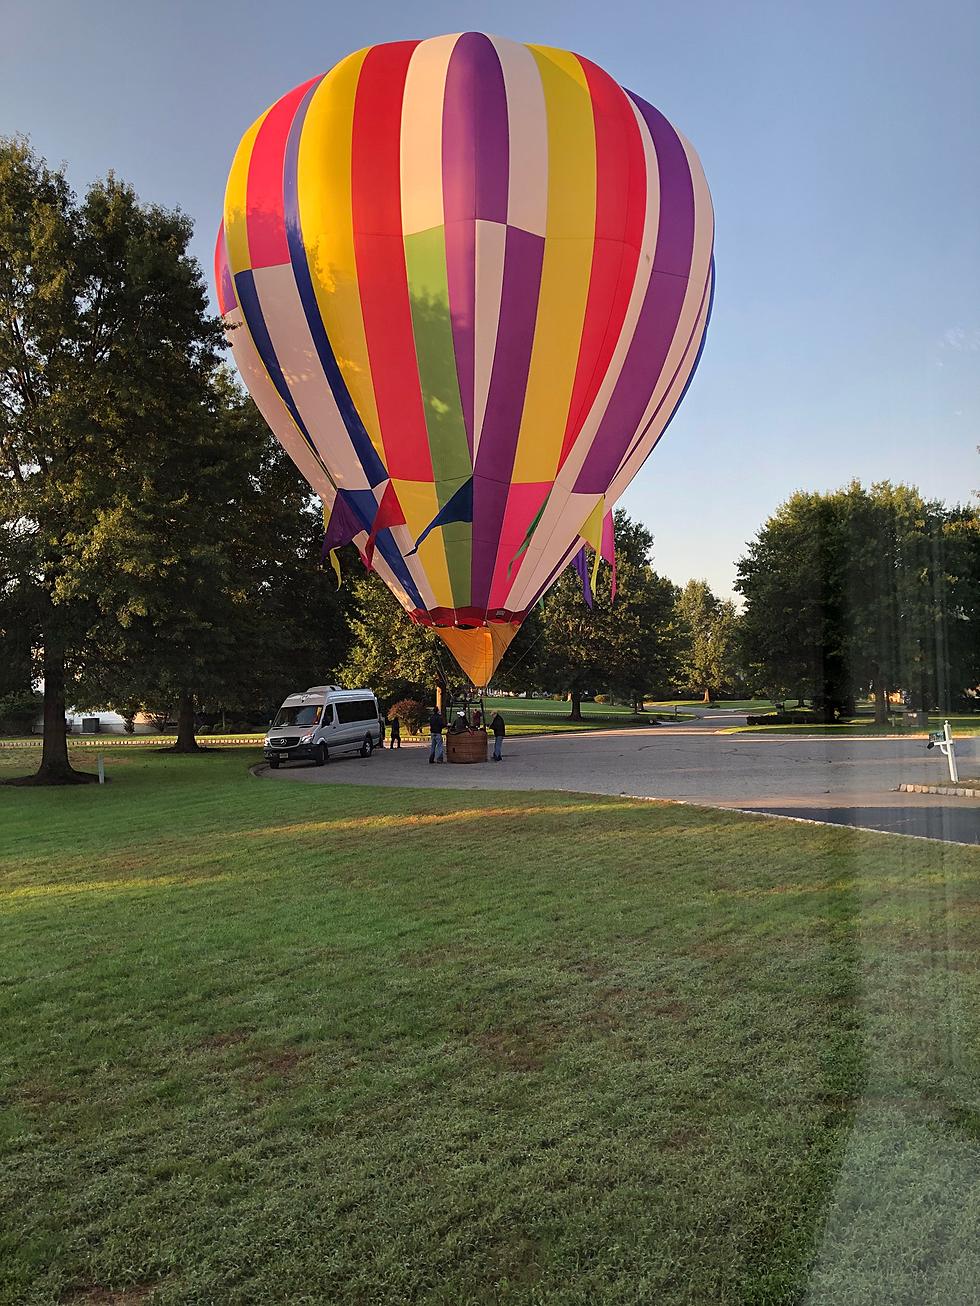 A hot air balloon landed right by my house this weekend